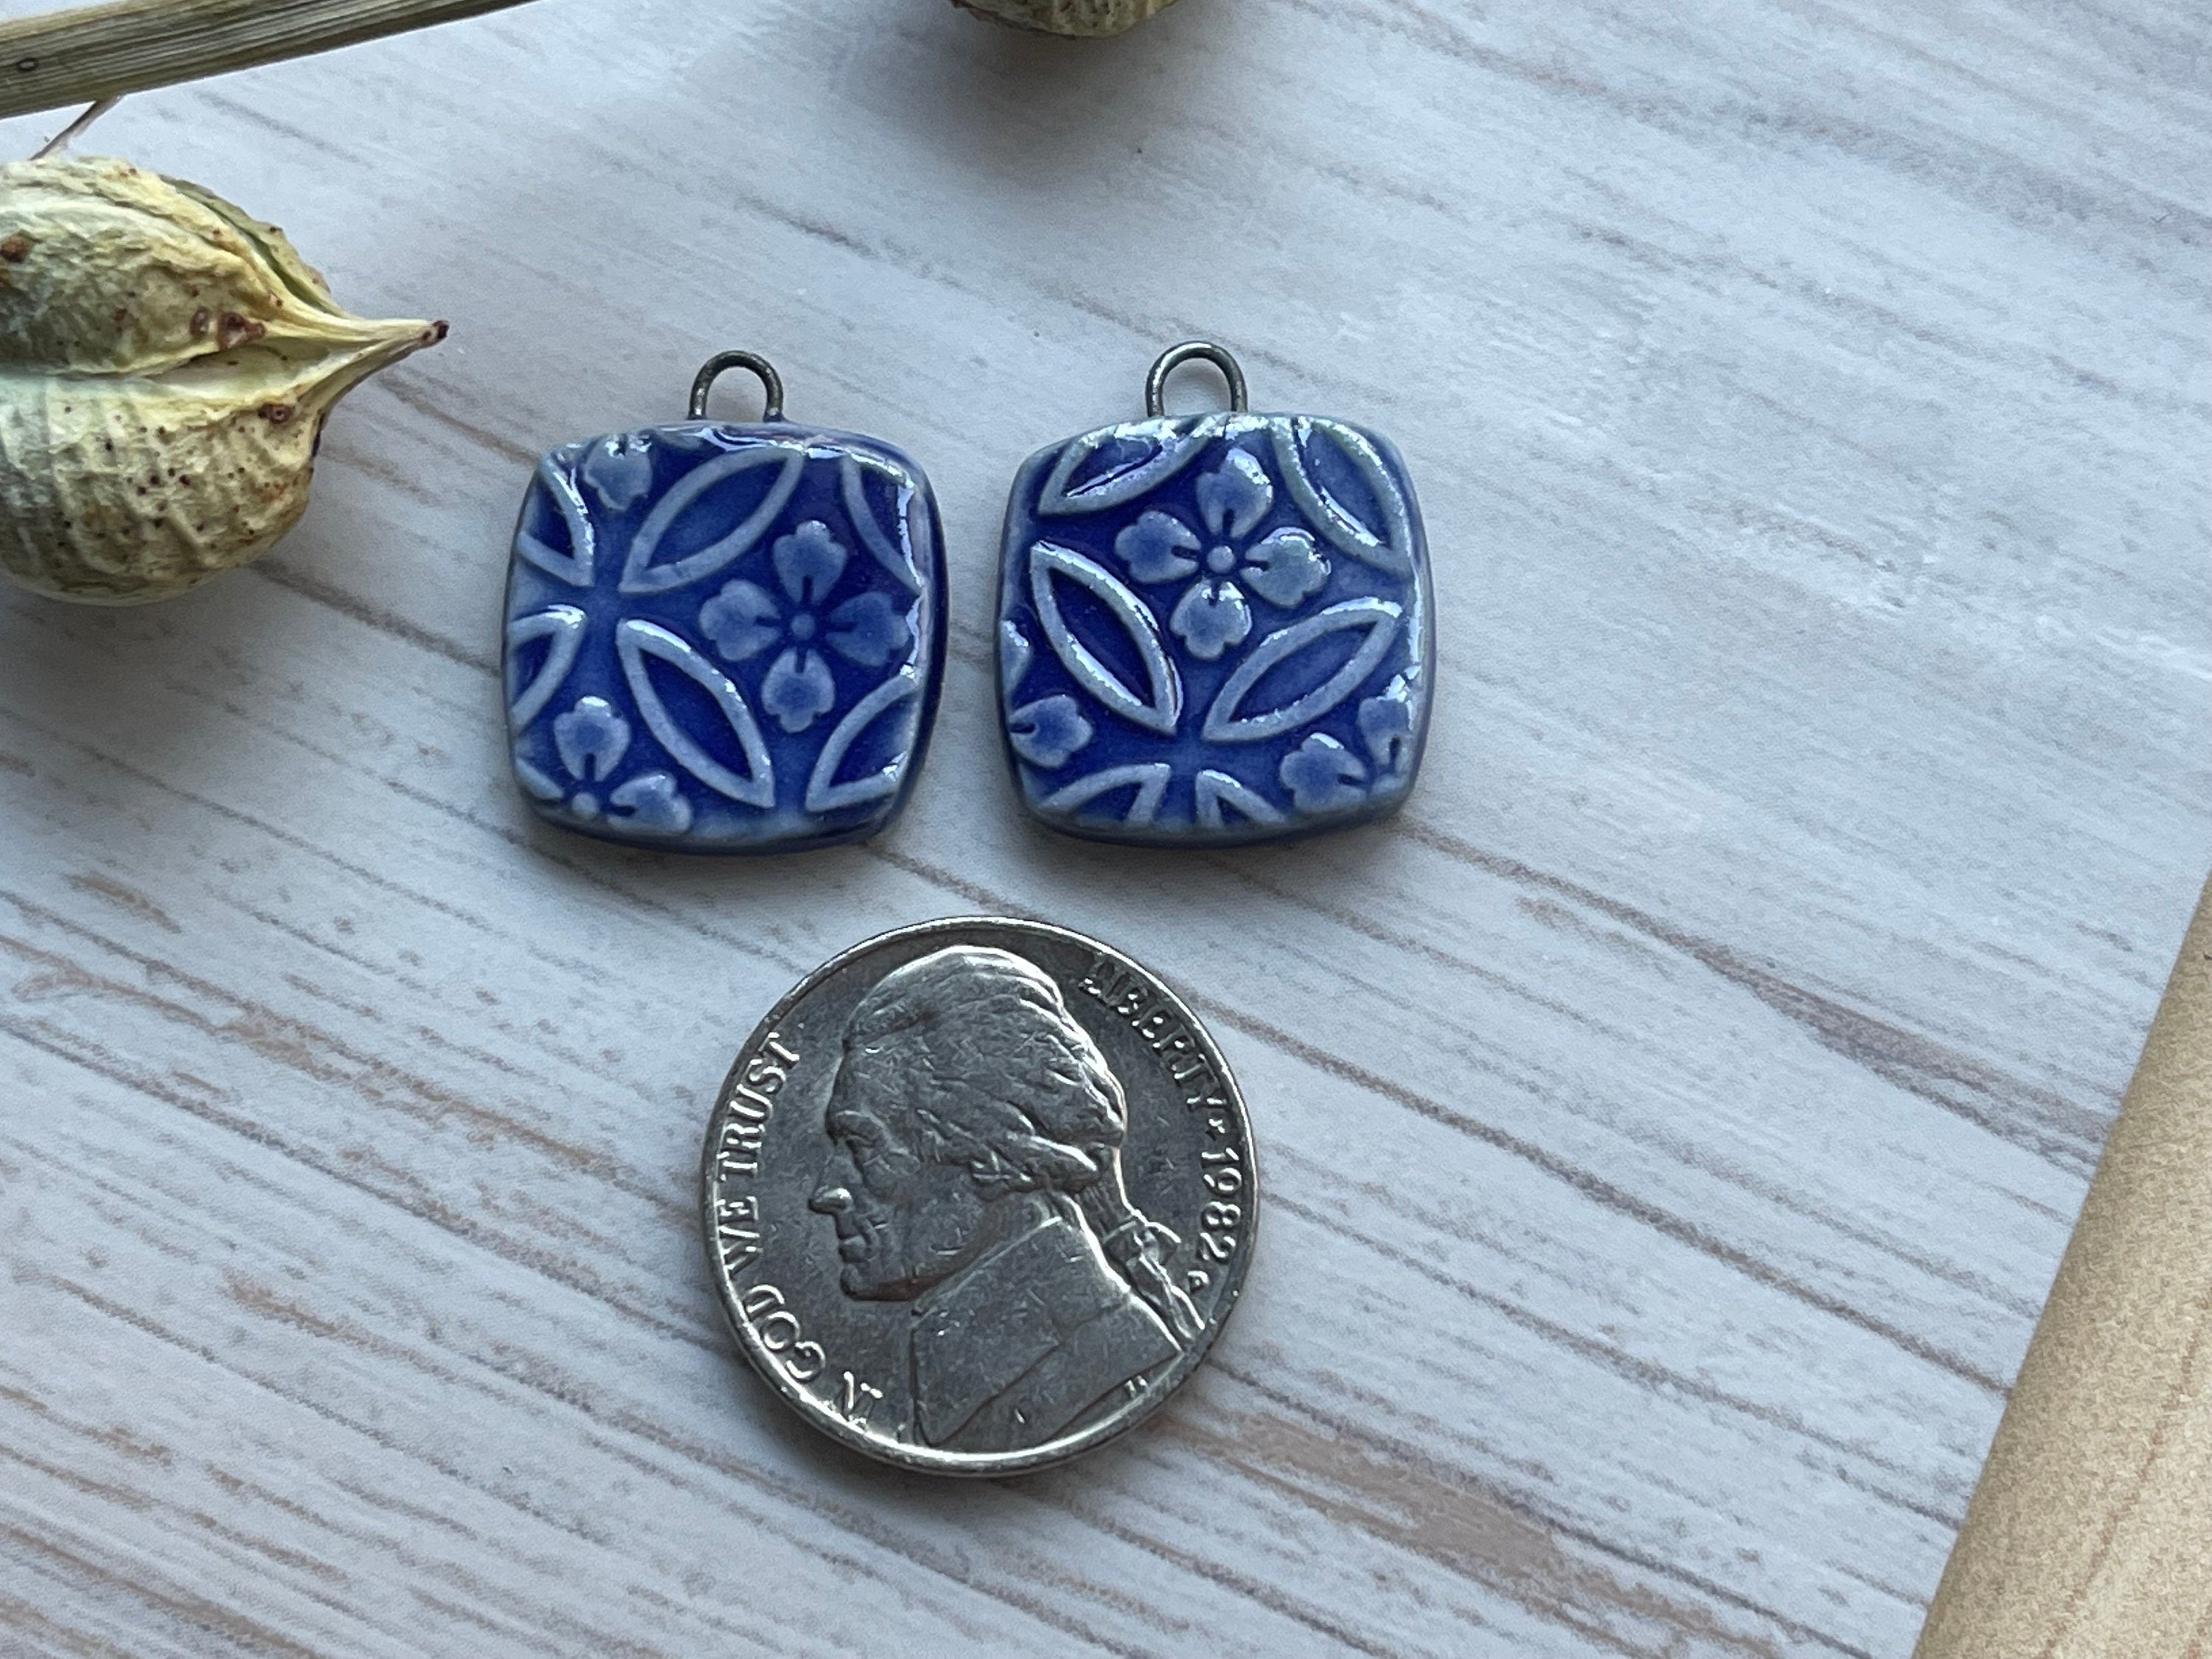 Blue Earring Bead Pair, Floral Pattern, Porcelain Ceramic Charms, Jewelry Making Components, Beading Handmade